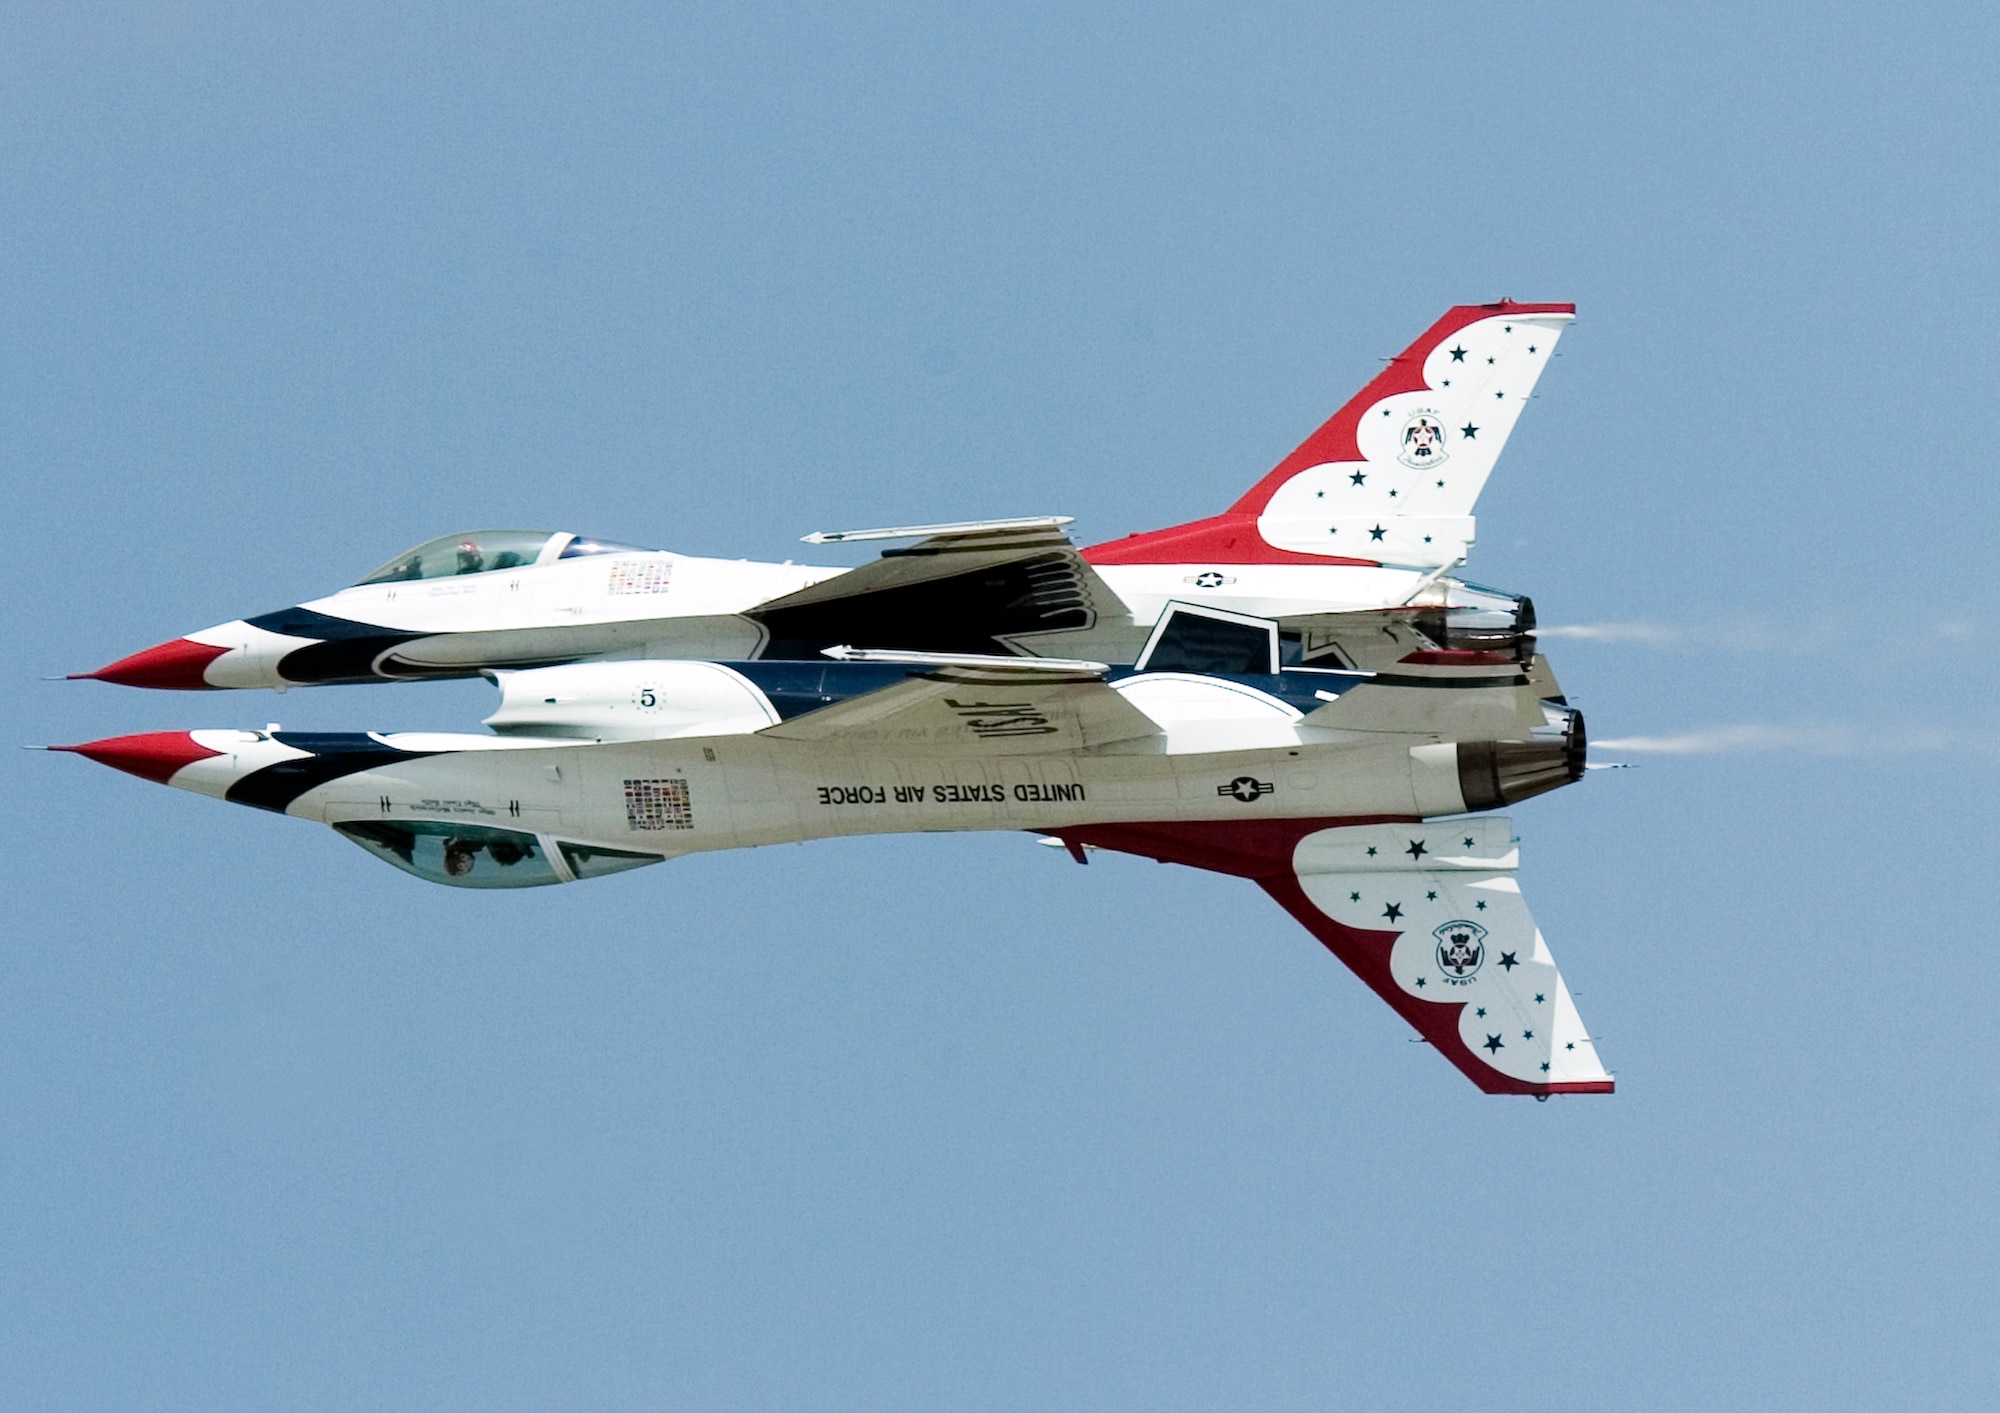 Thunderbirds No. 5 and 6 perform a reflection pass during a practice show at Scott Air Force Base, Ill., on Aug. 11. (U.S. Air Force photo/Master Sgt. Jack Braden)